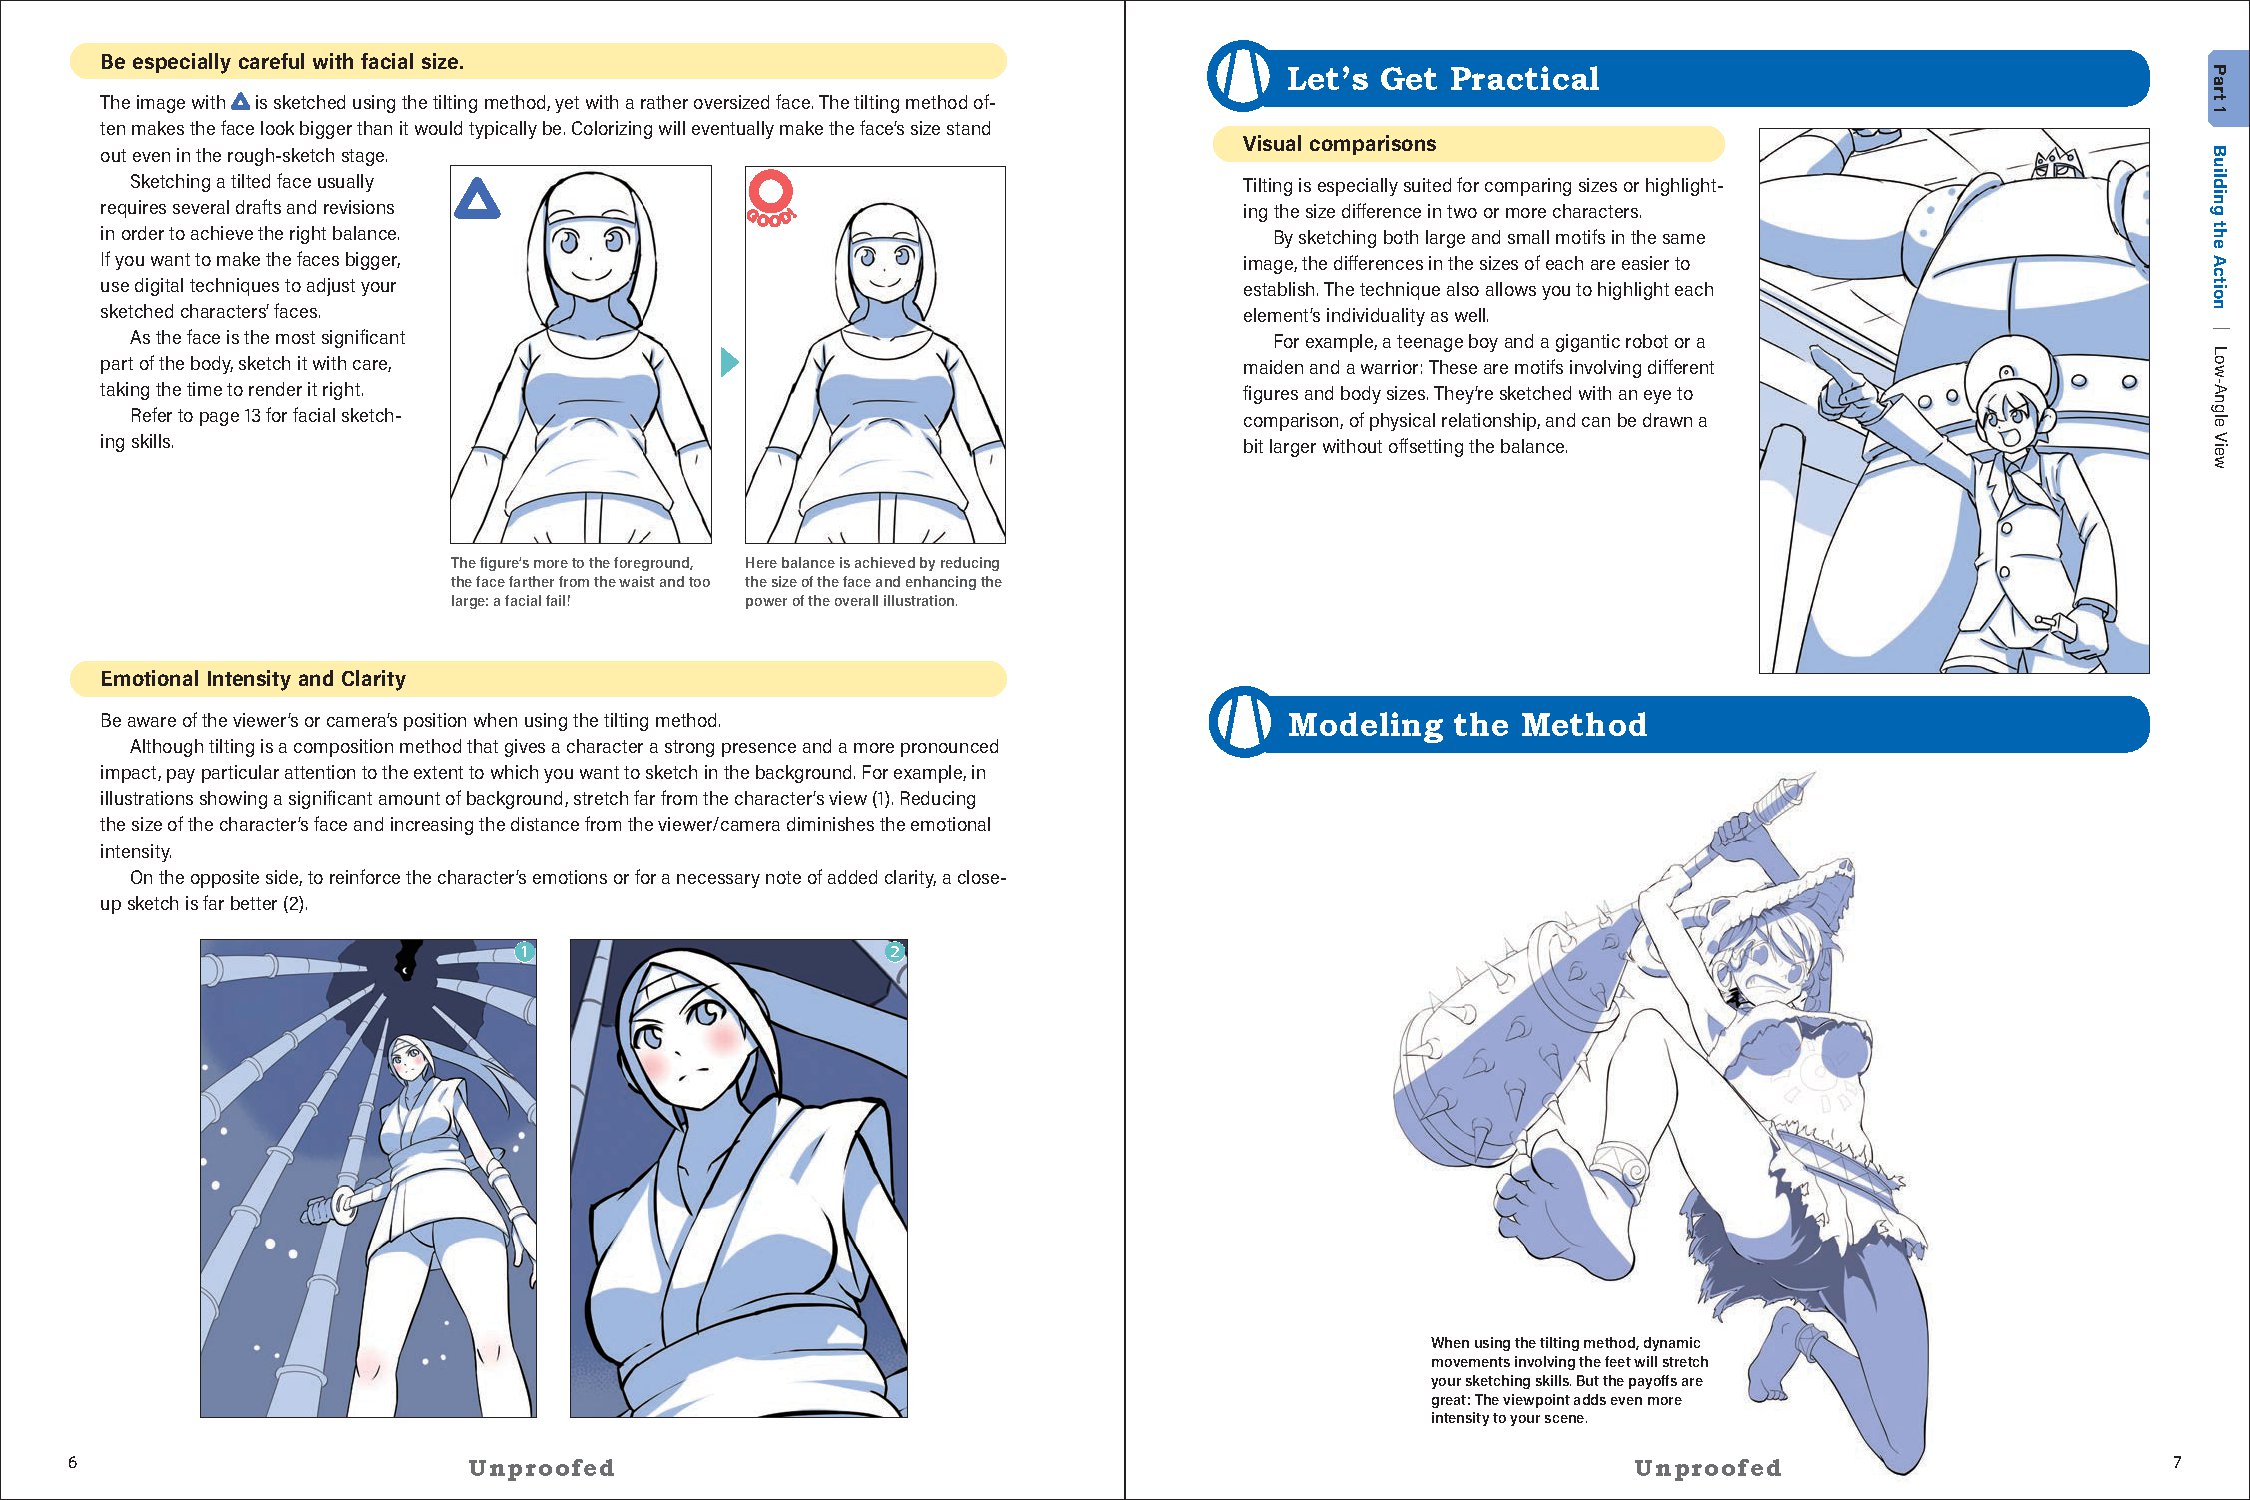 How to Create Manga: Drawing Action Scenes and Characters